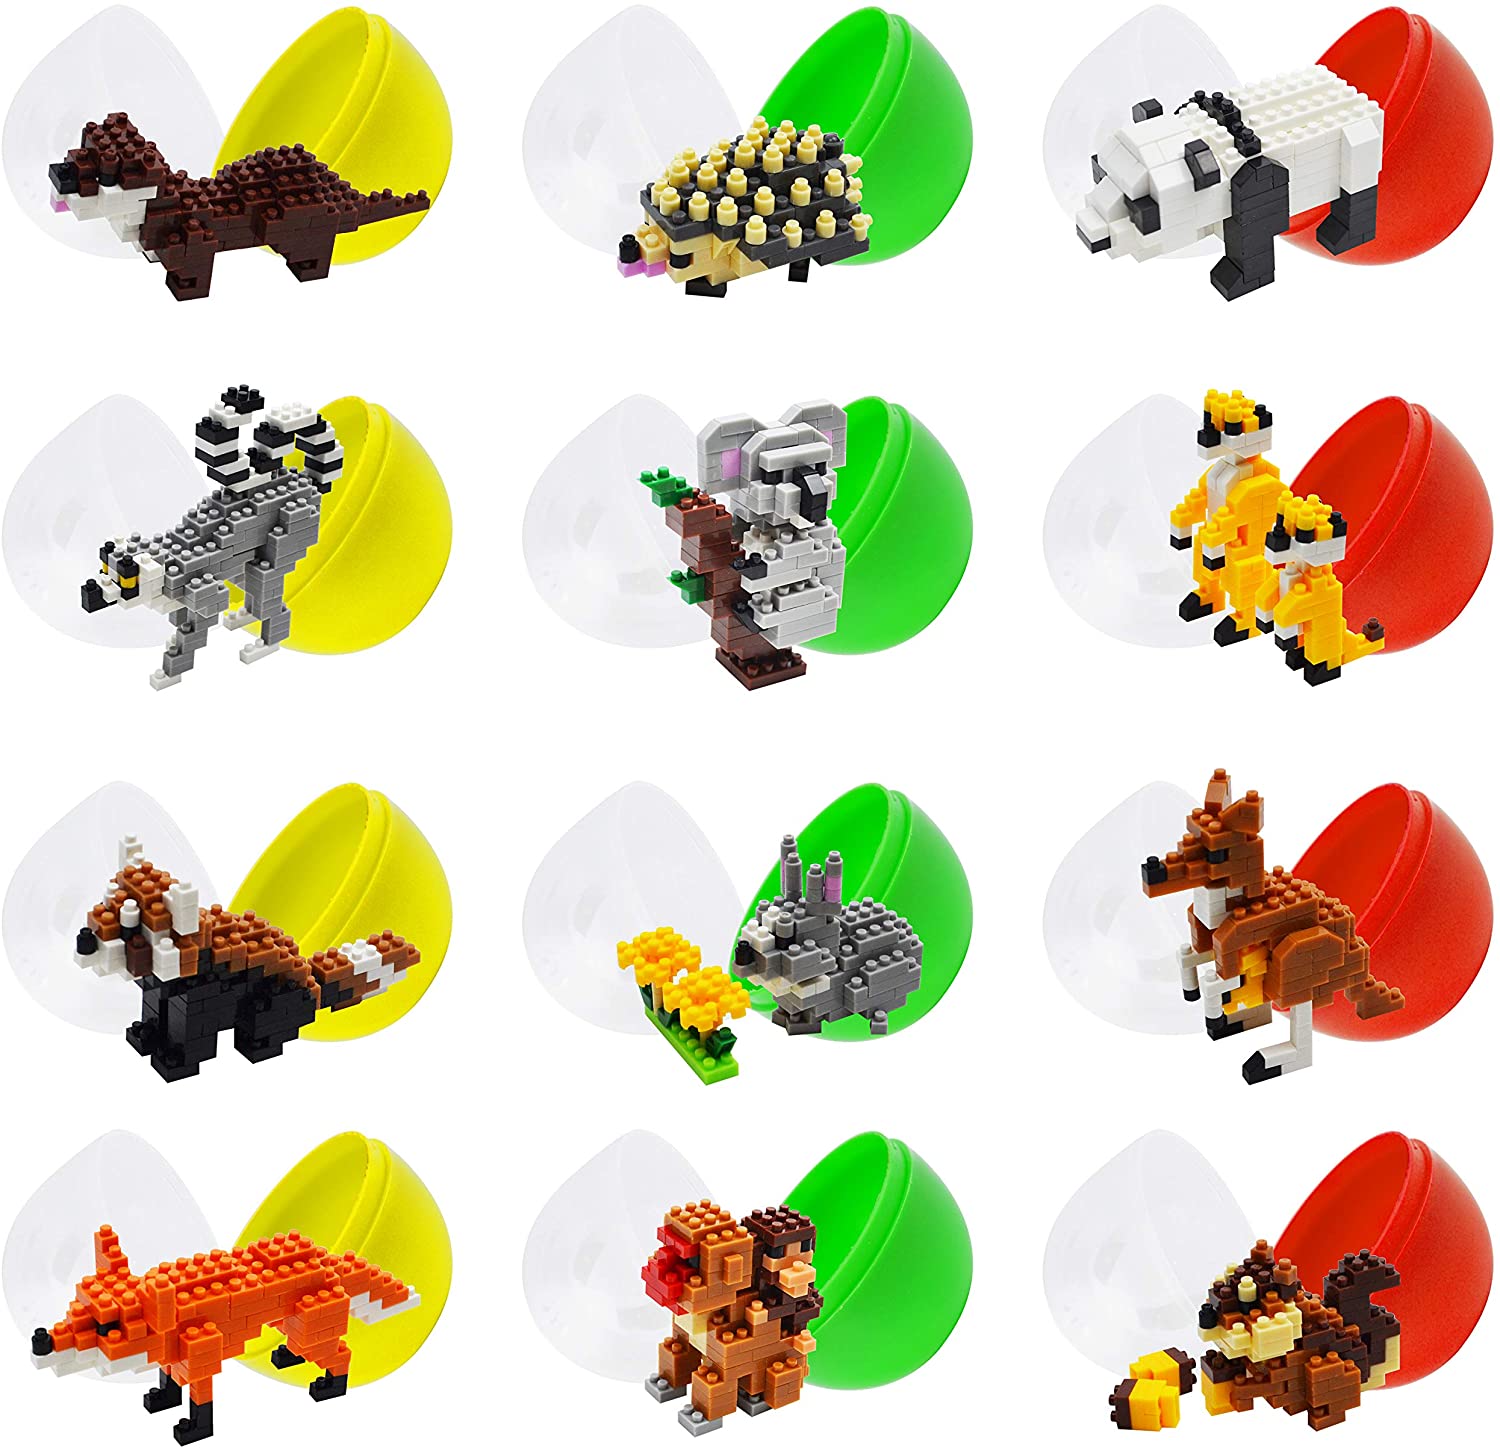 12 Pcs Prefilled Easter Eggs with Animal Building Blocks